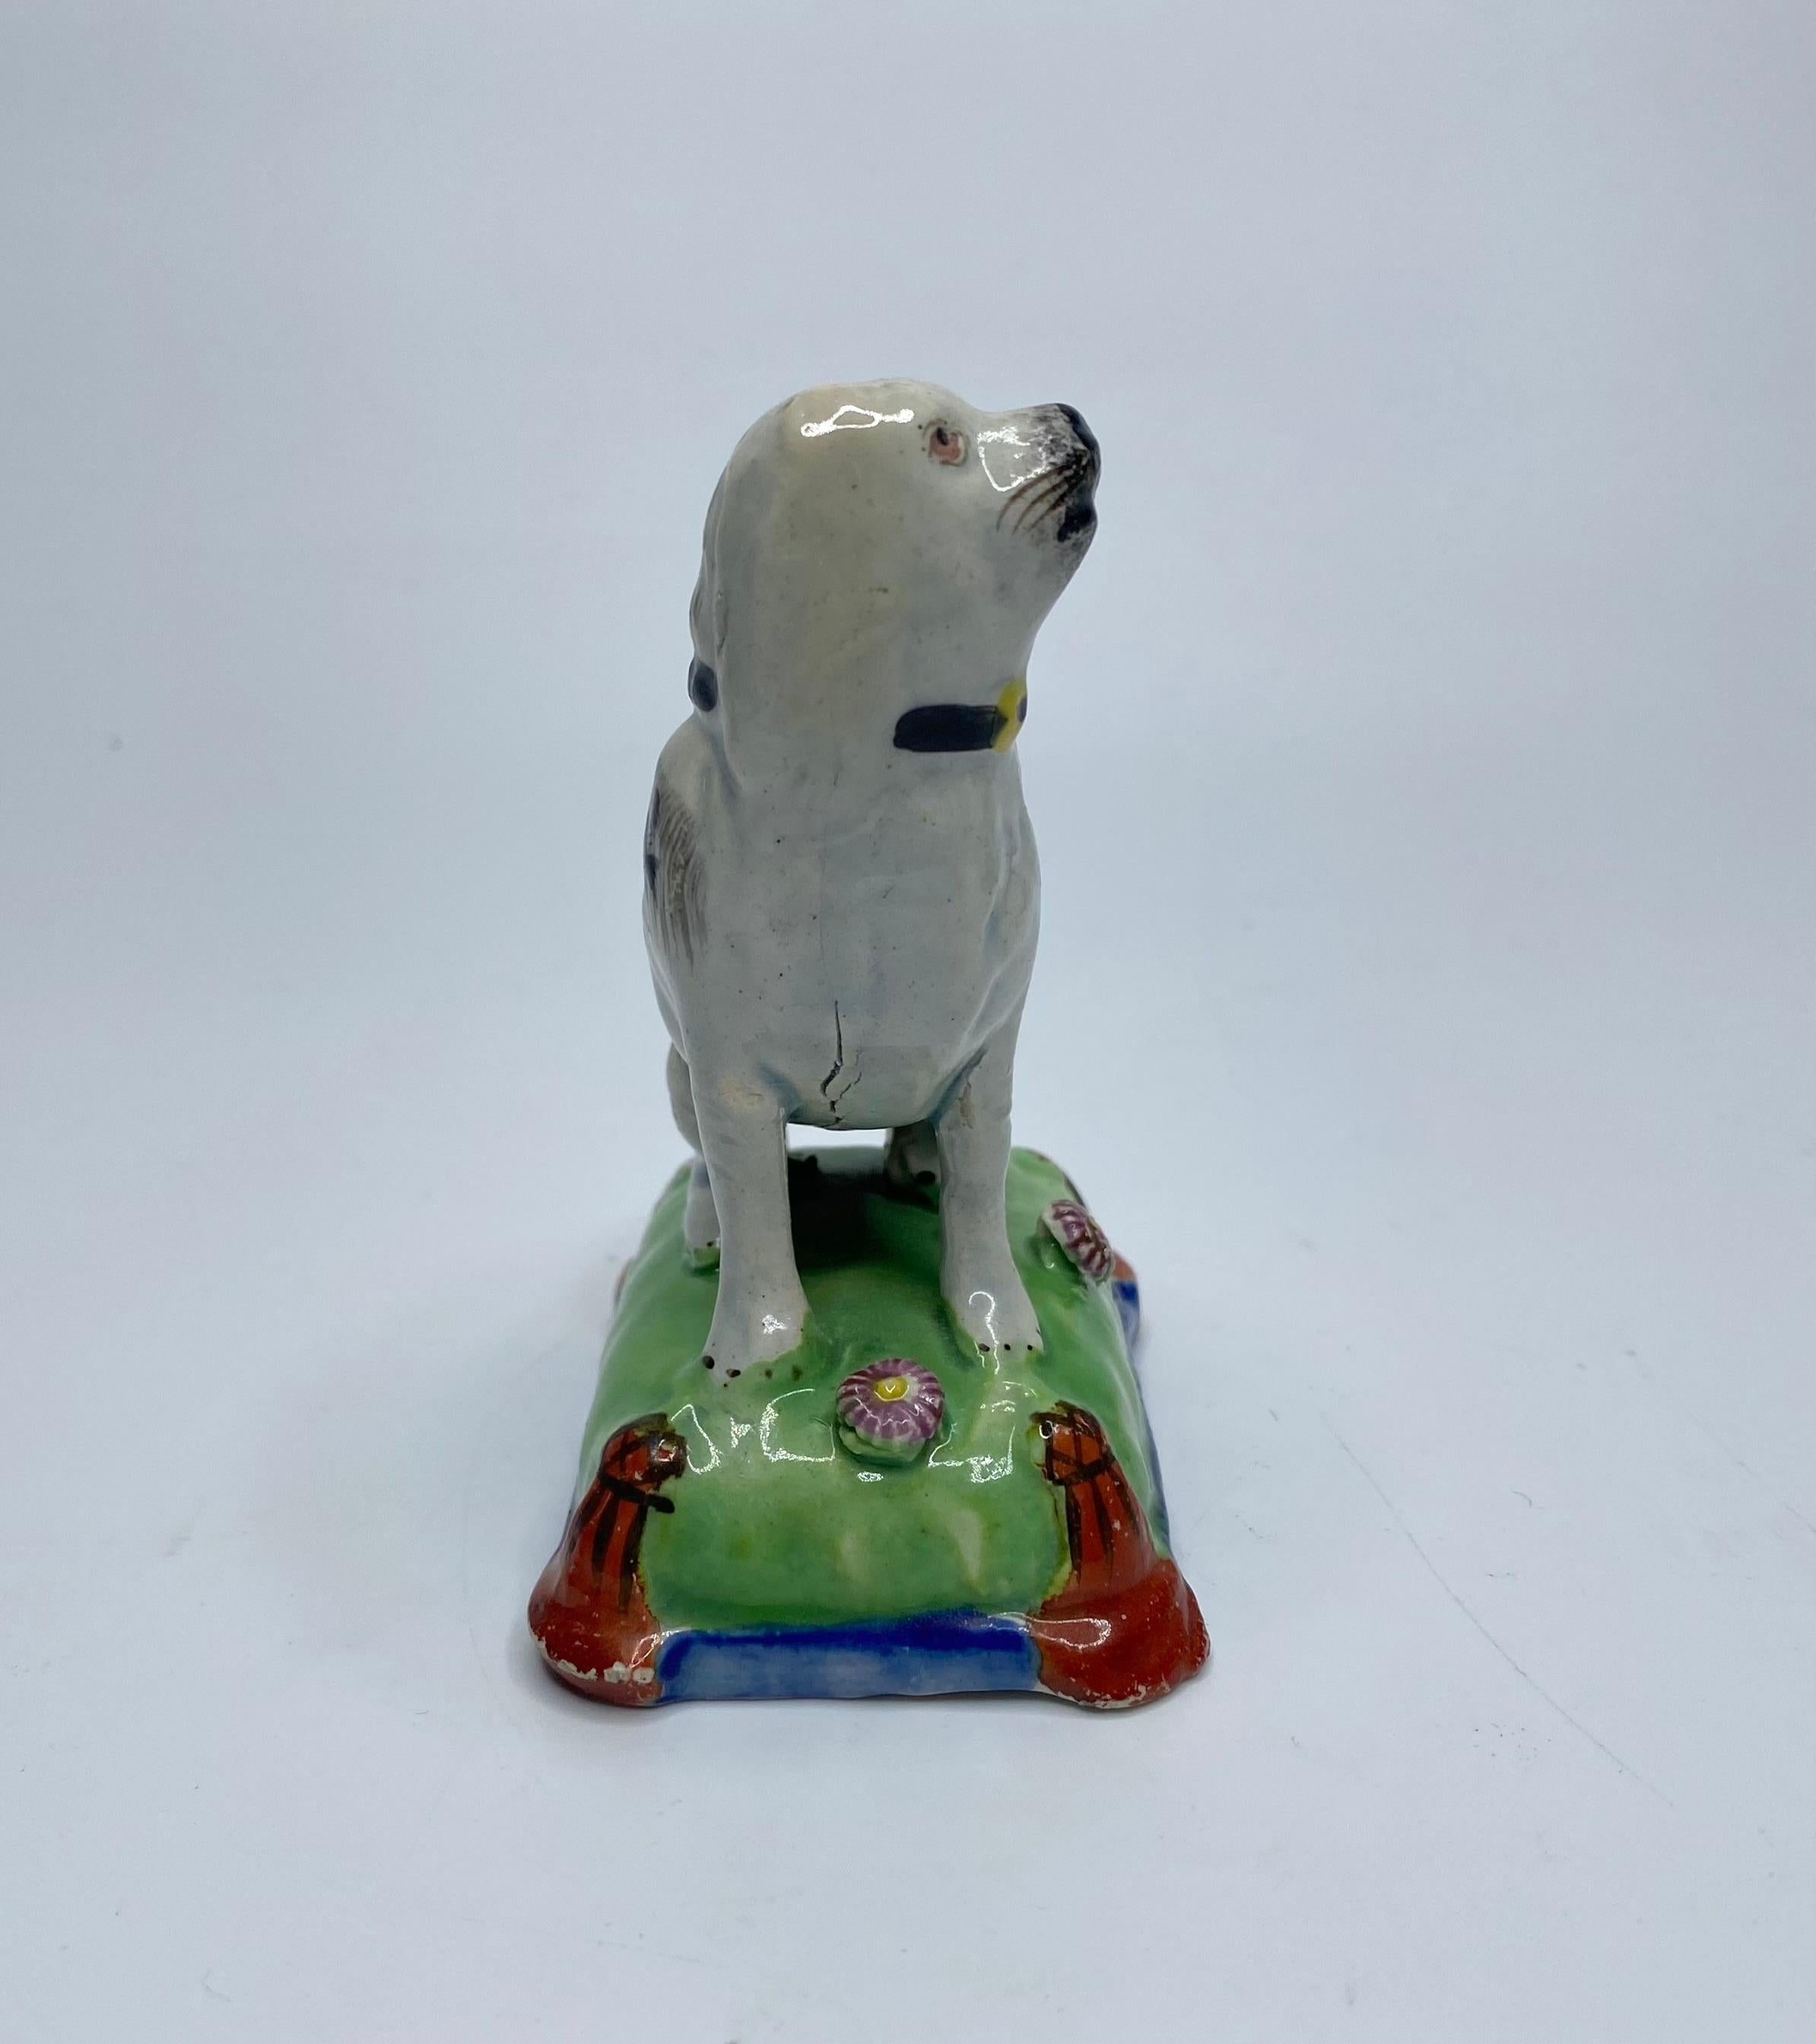 Staffordshire pottery pearlware seated dog, c. 1830. Attractively modelled, as a black spotted dog, seated upon a cushion.
The green and blue enamelled cushion, applied with two flower heads, and having iron red tassels, tied at the corners.
All